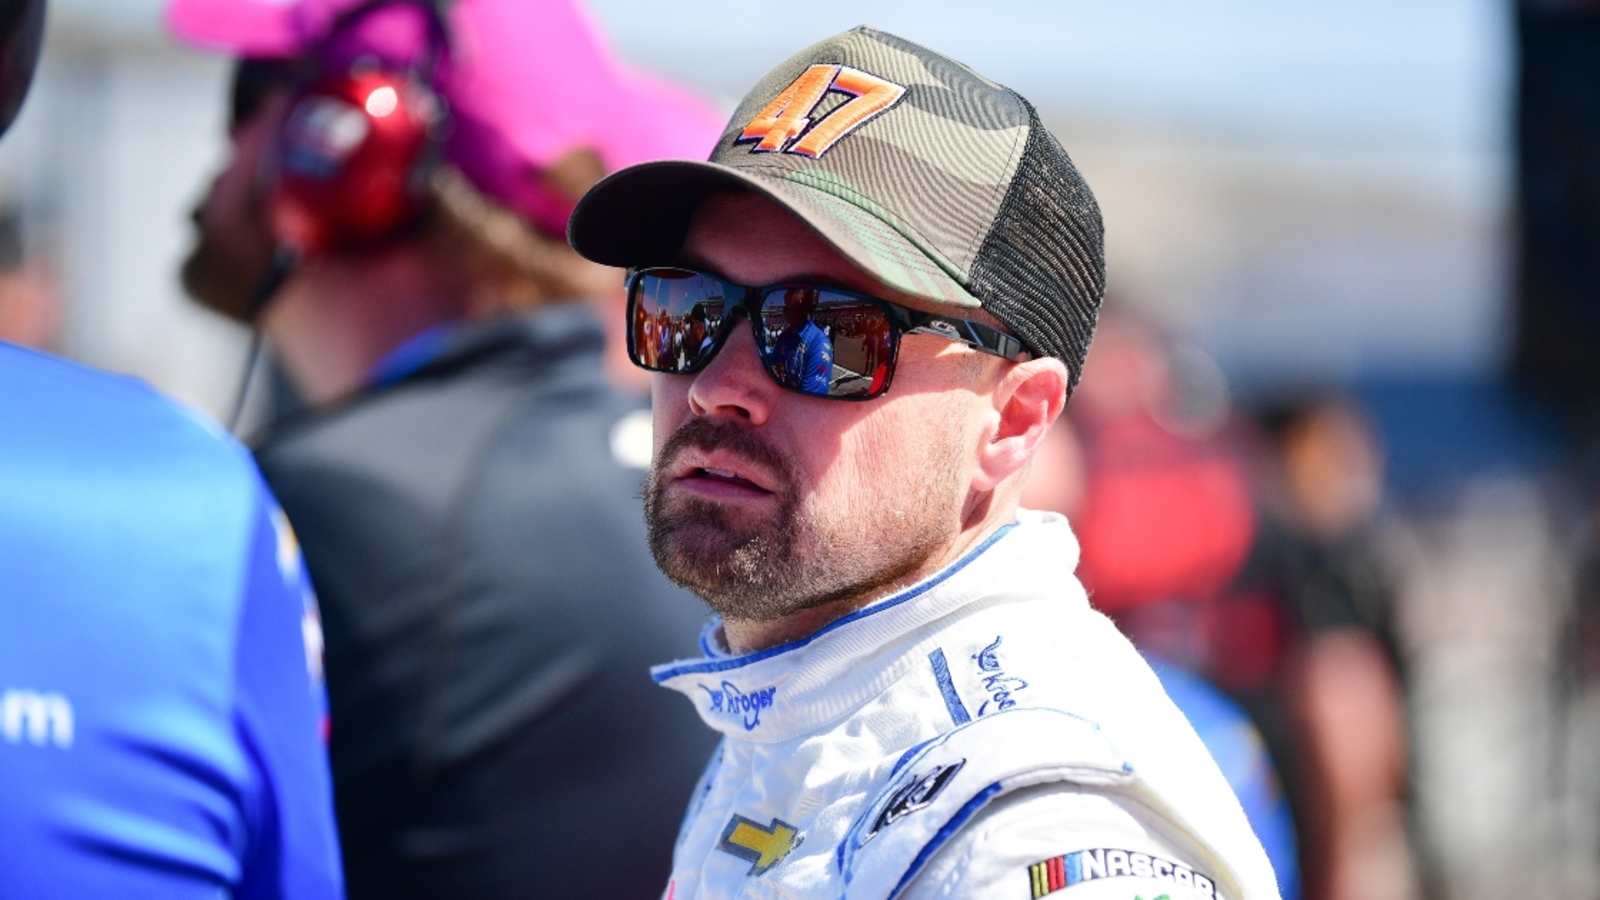 Denny Hamlin reacts to NASCAR fining Ricky Stenhouse Jr. for Kyle Busch fight: ‘They have to do something different’